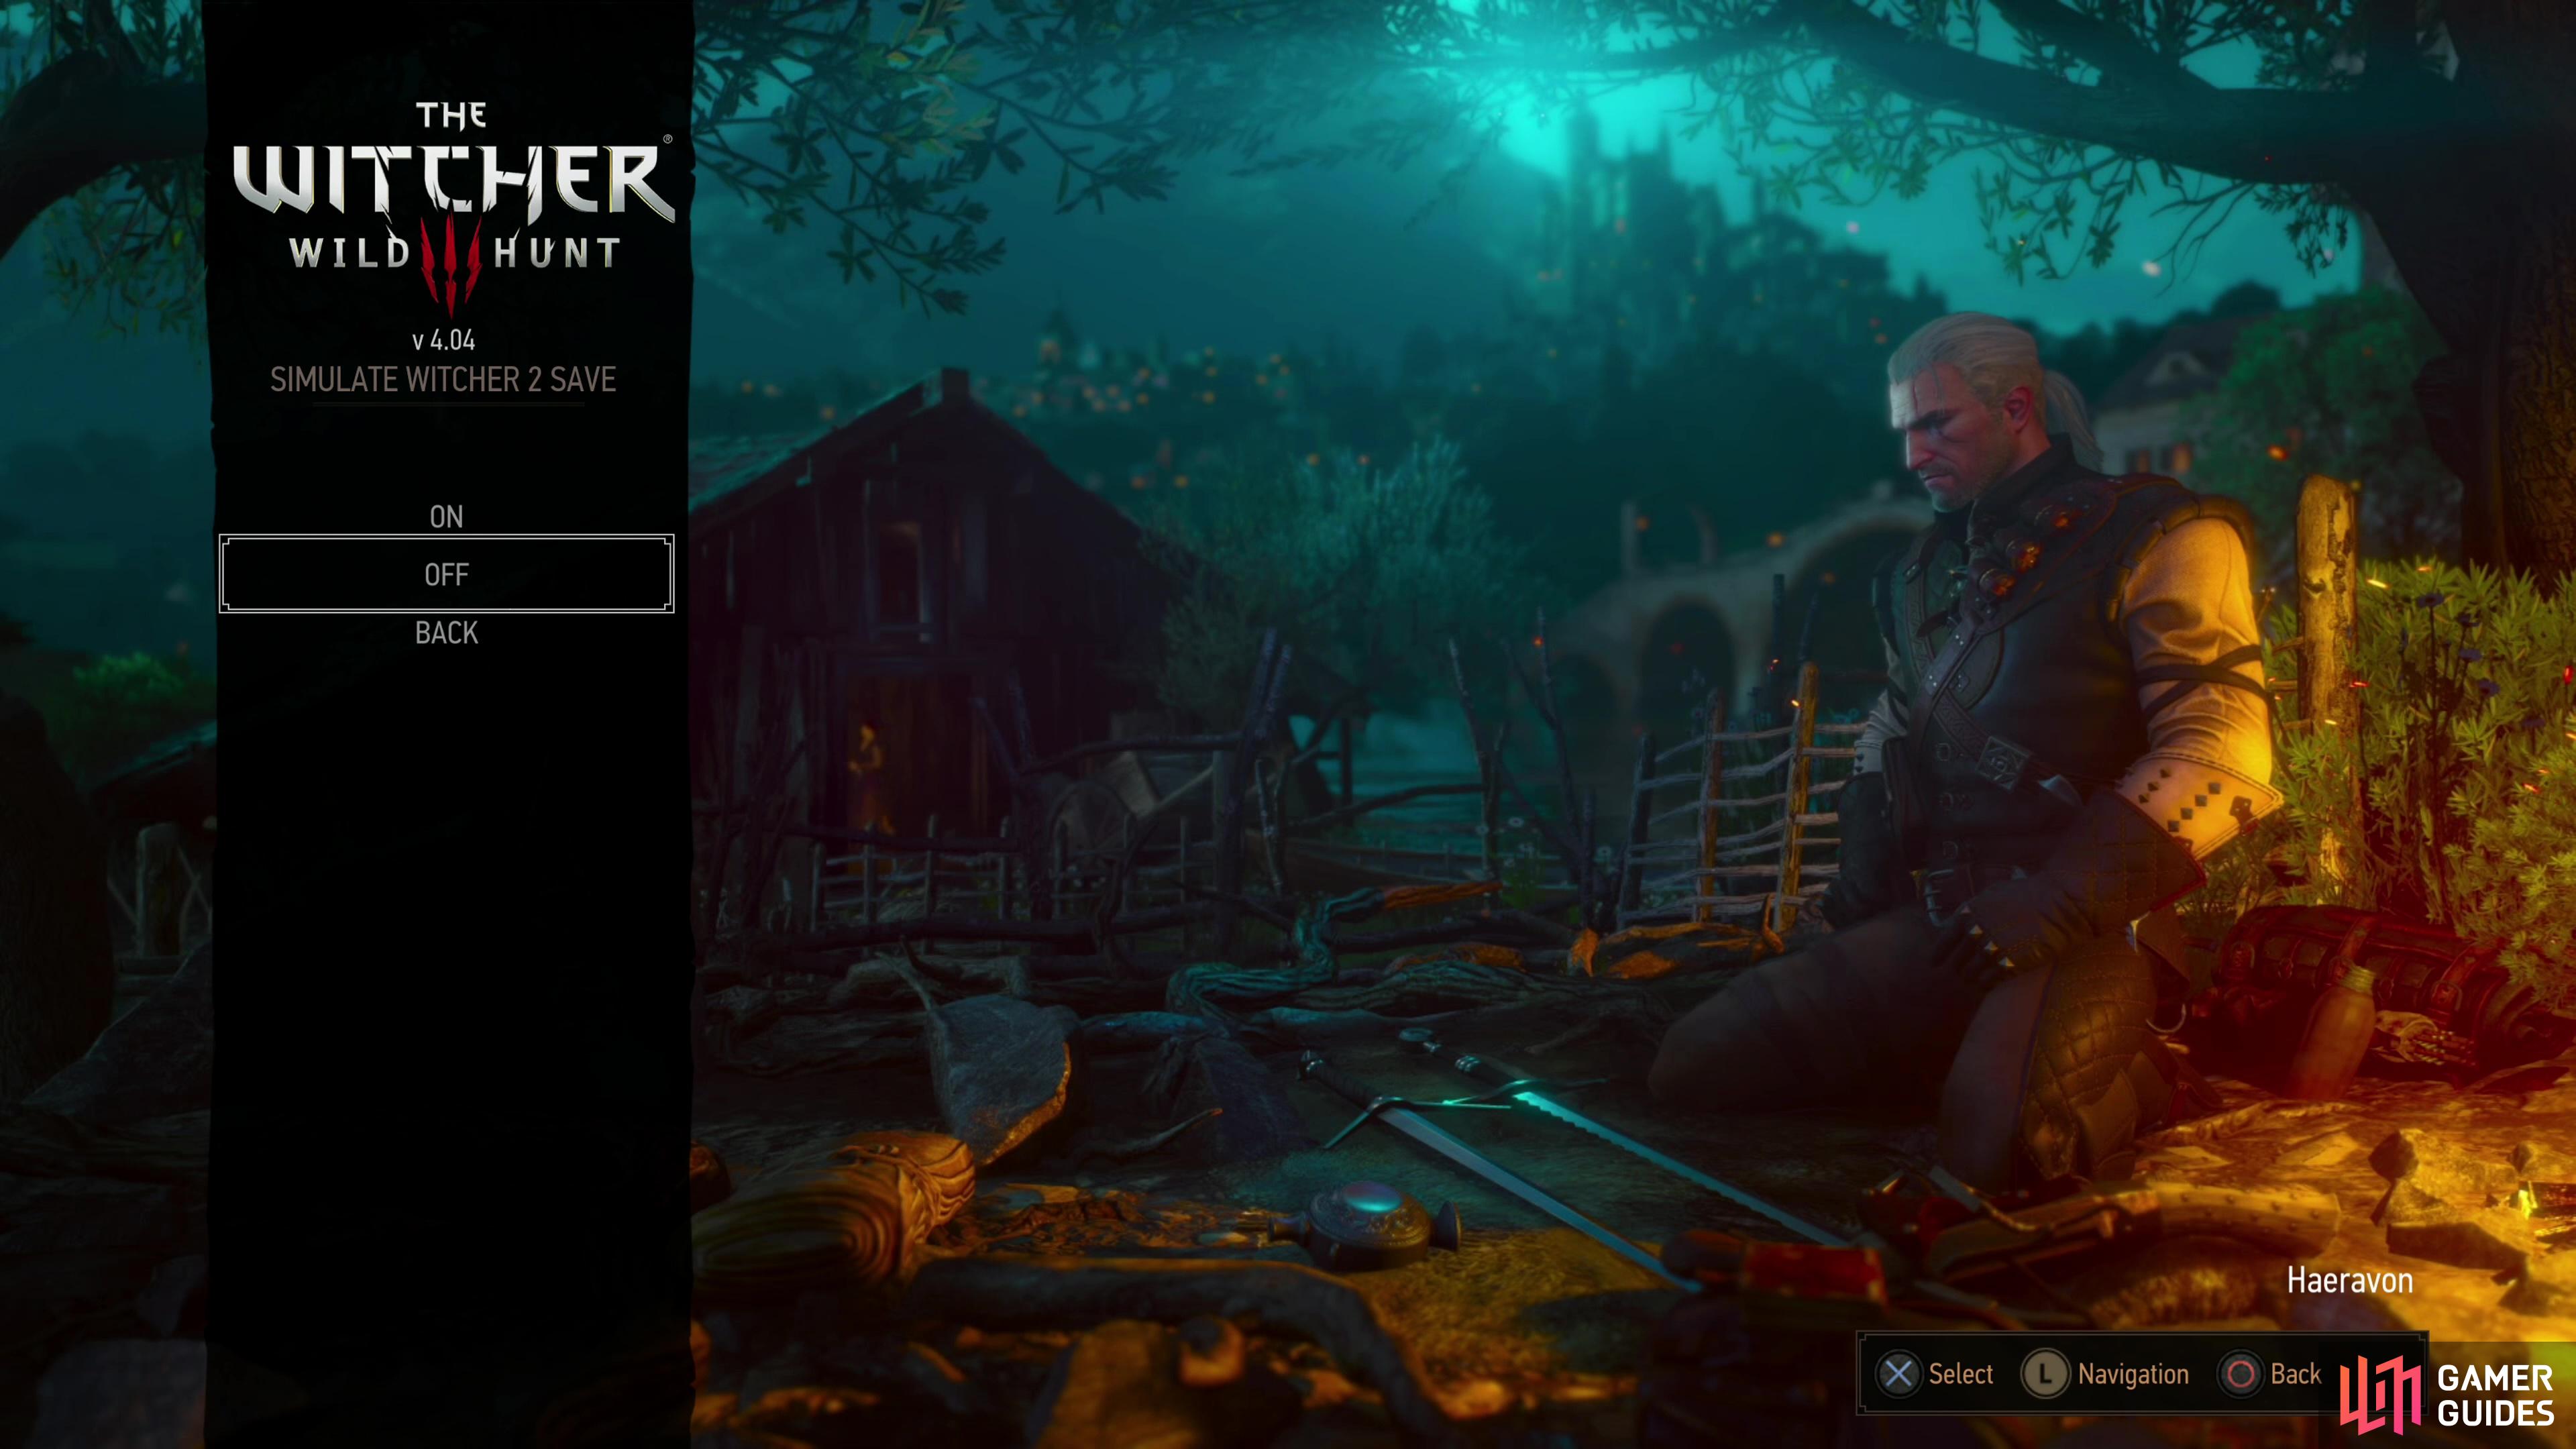 You can simulate a Witcher 2 save to set some of the choices made in the last time, or decline and you’ll get to pick these outcomes later in the game.